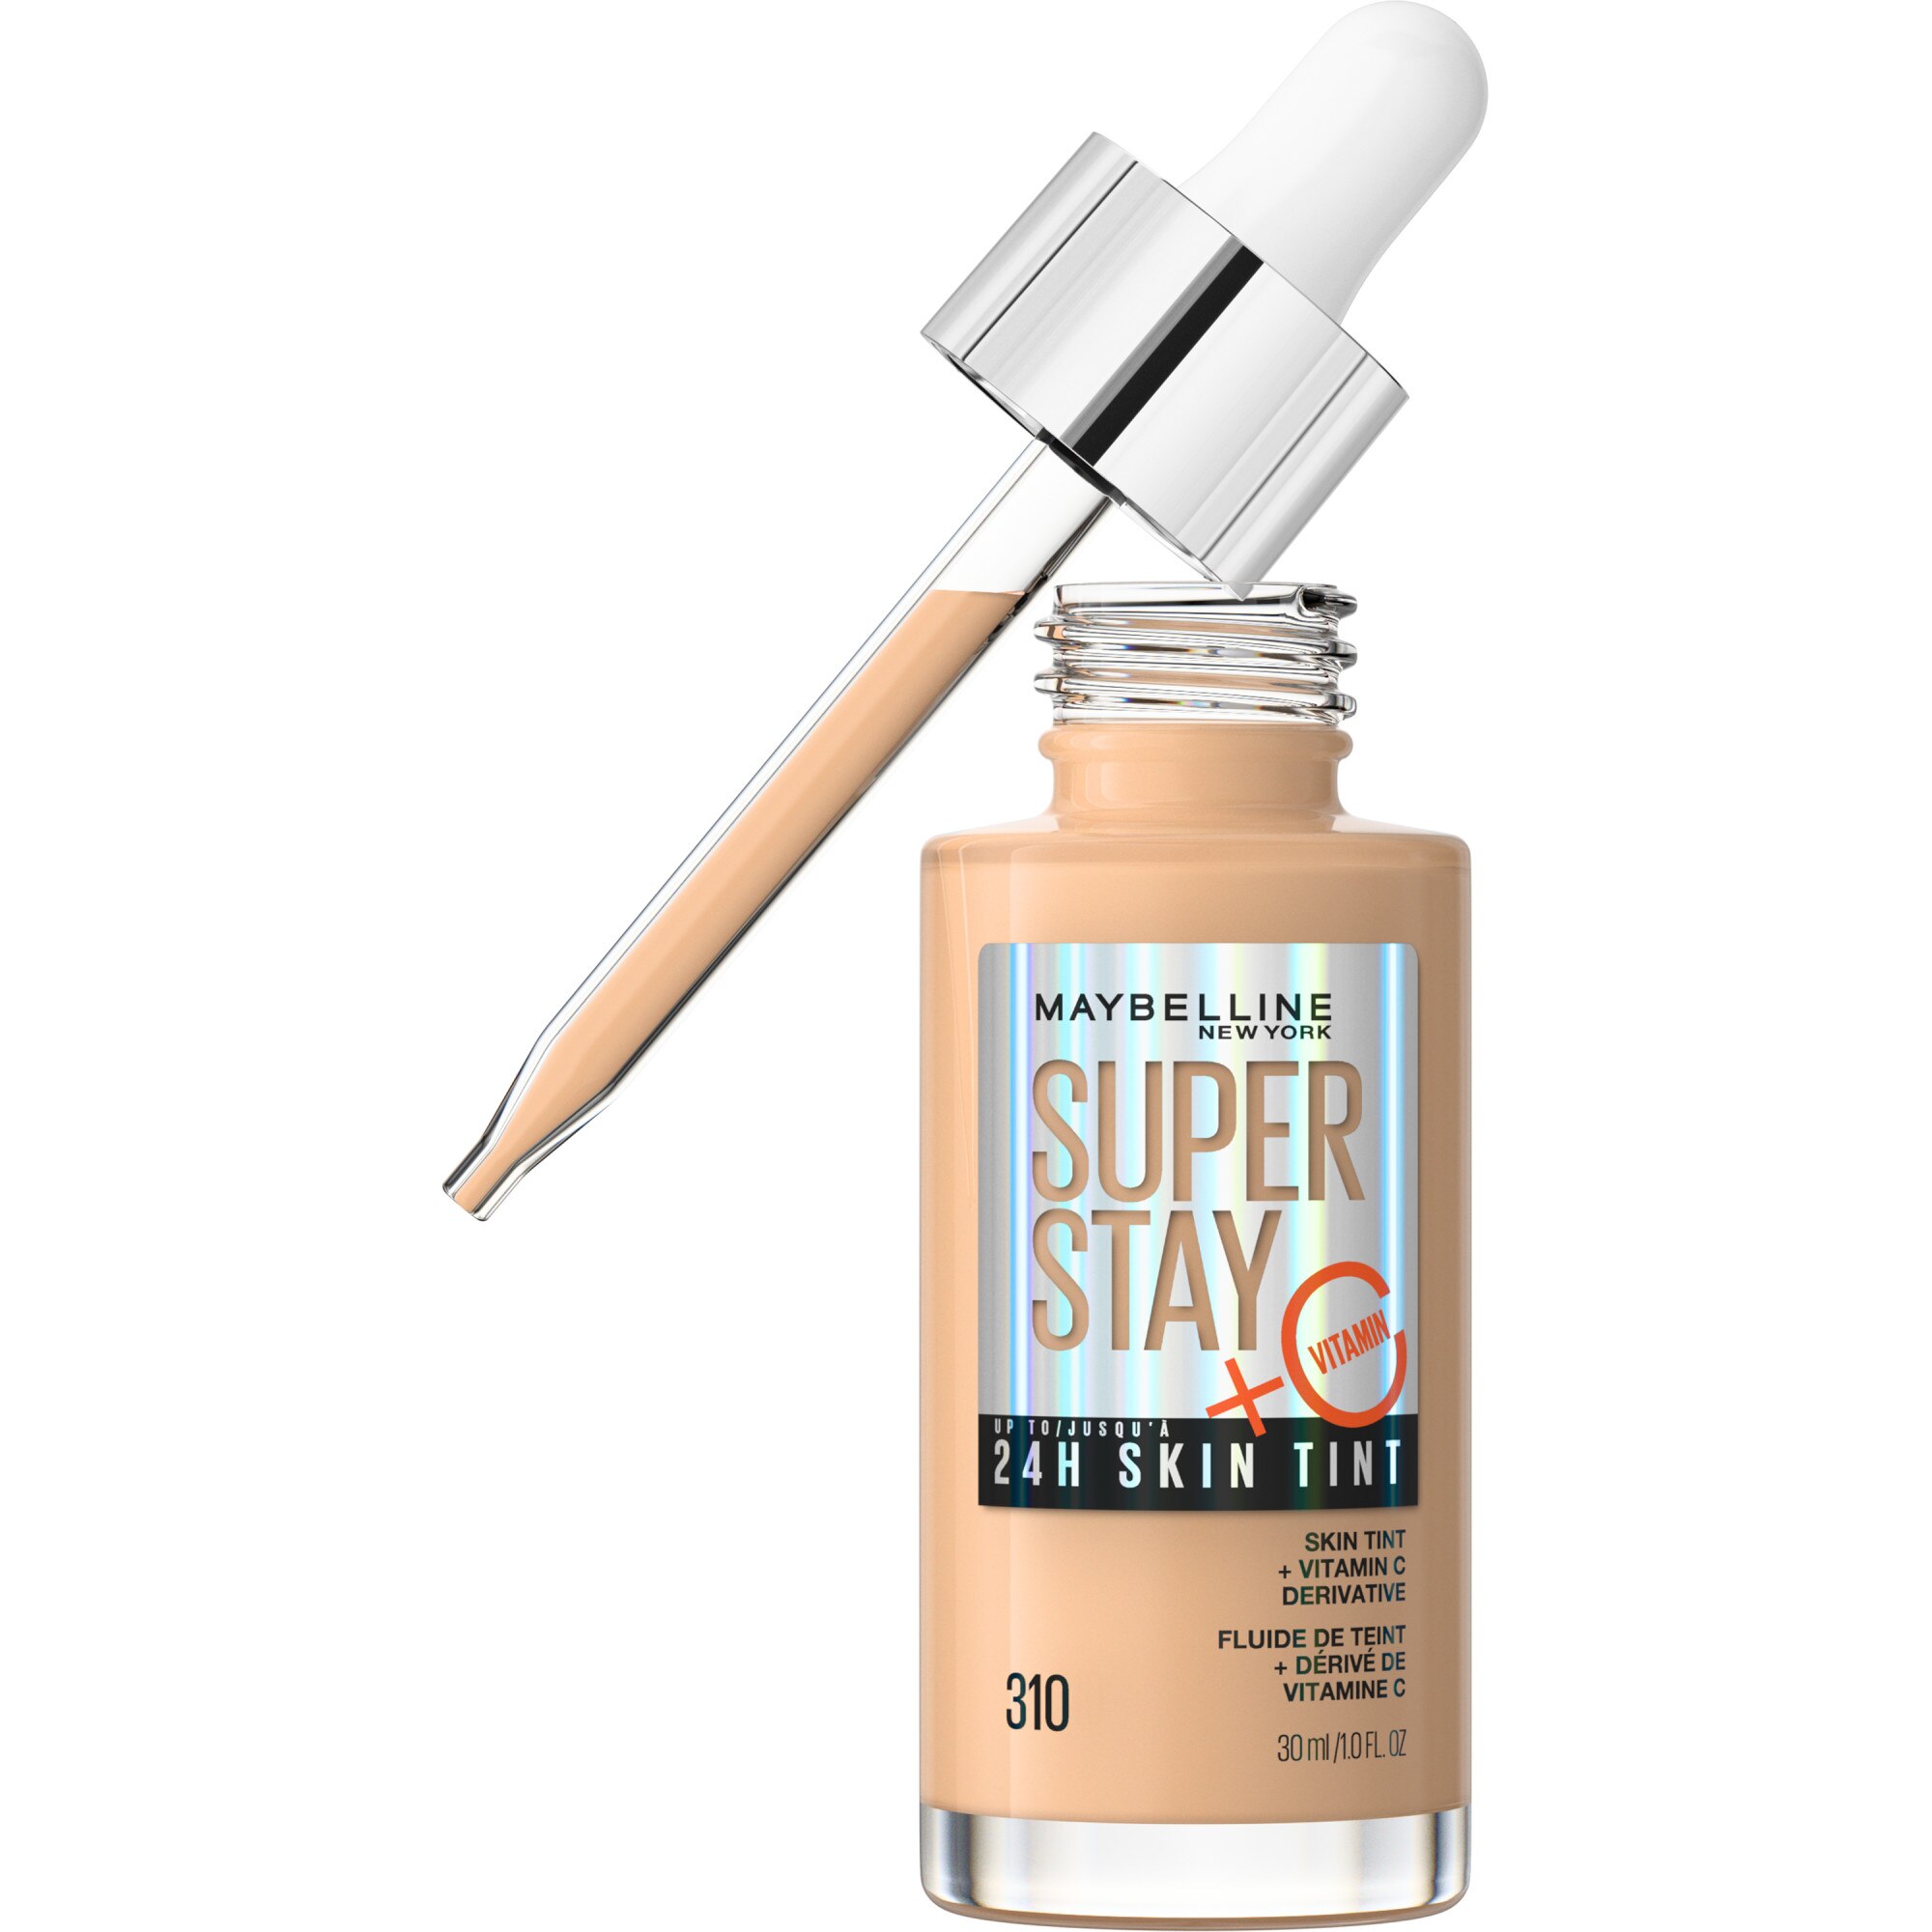 Maybelline New York Super Stay Up To 24HR Skin Tint With Vitamin C, 310, 1 Oz , CVS